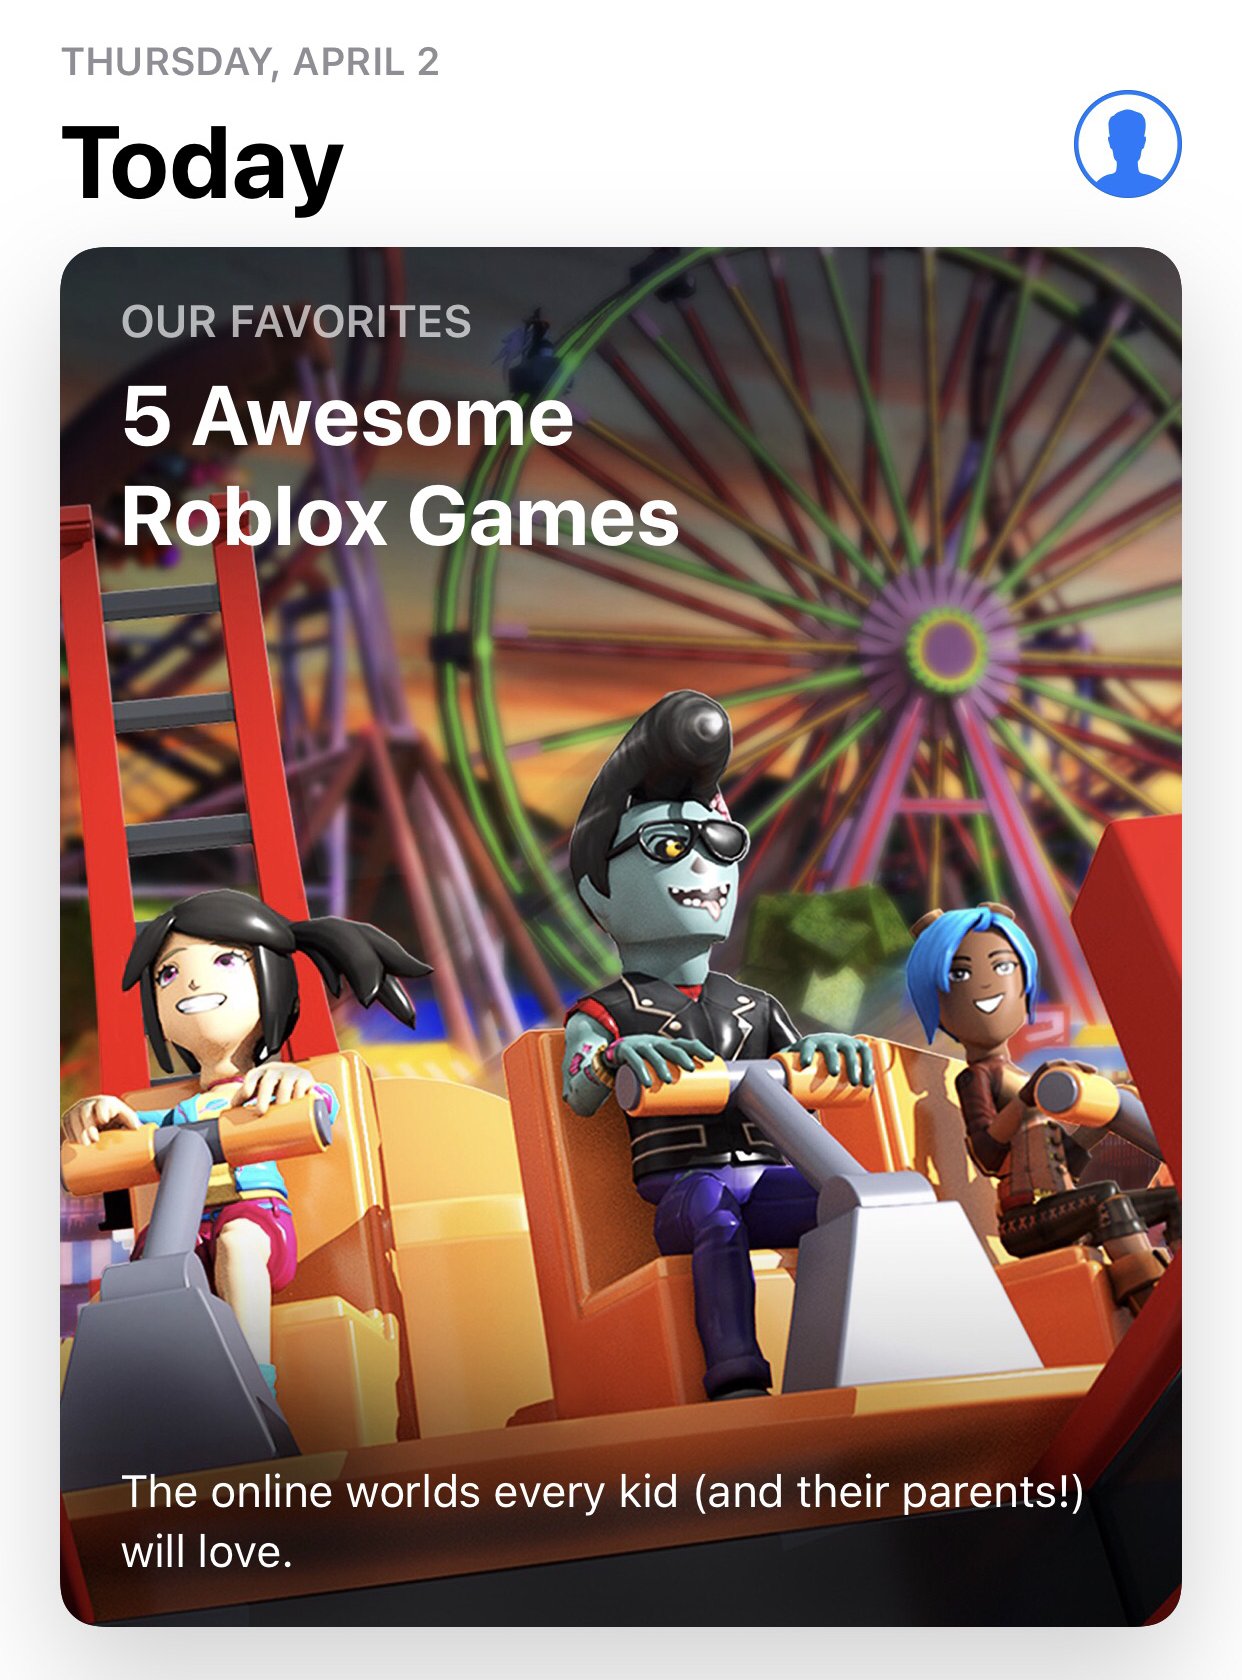 Adopt Me On Twitter We Re Featured As The 1 Roblox Game In The Apple App Store Today Thank You So Much You Can Find It By Going To Your App Store S - roblox adopt me apple